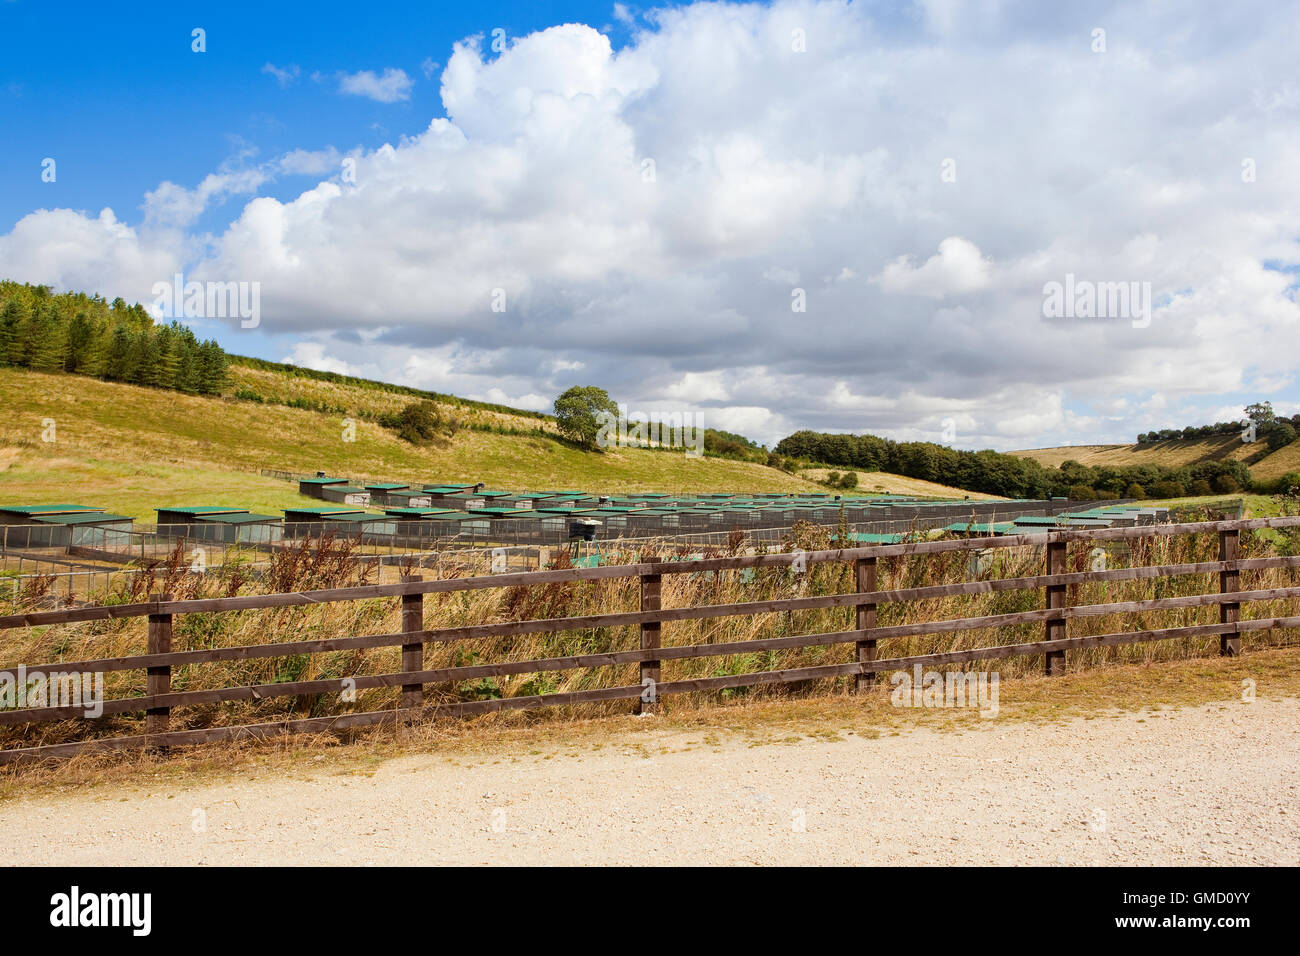 Game bird rearing pens on the grassy hillsides of the Yorkshire wolds in summertime. Stock Photo